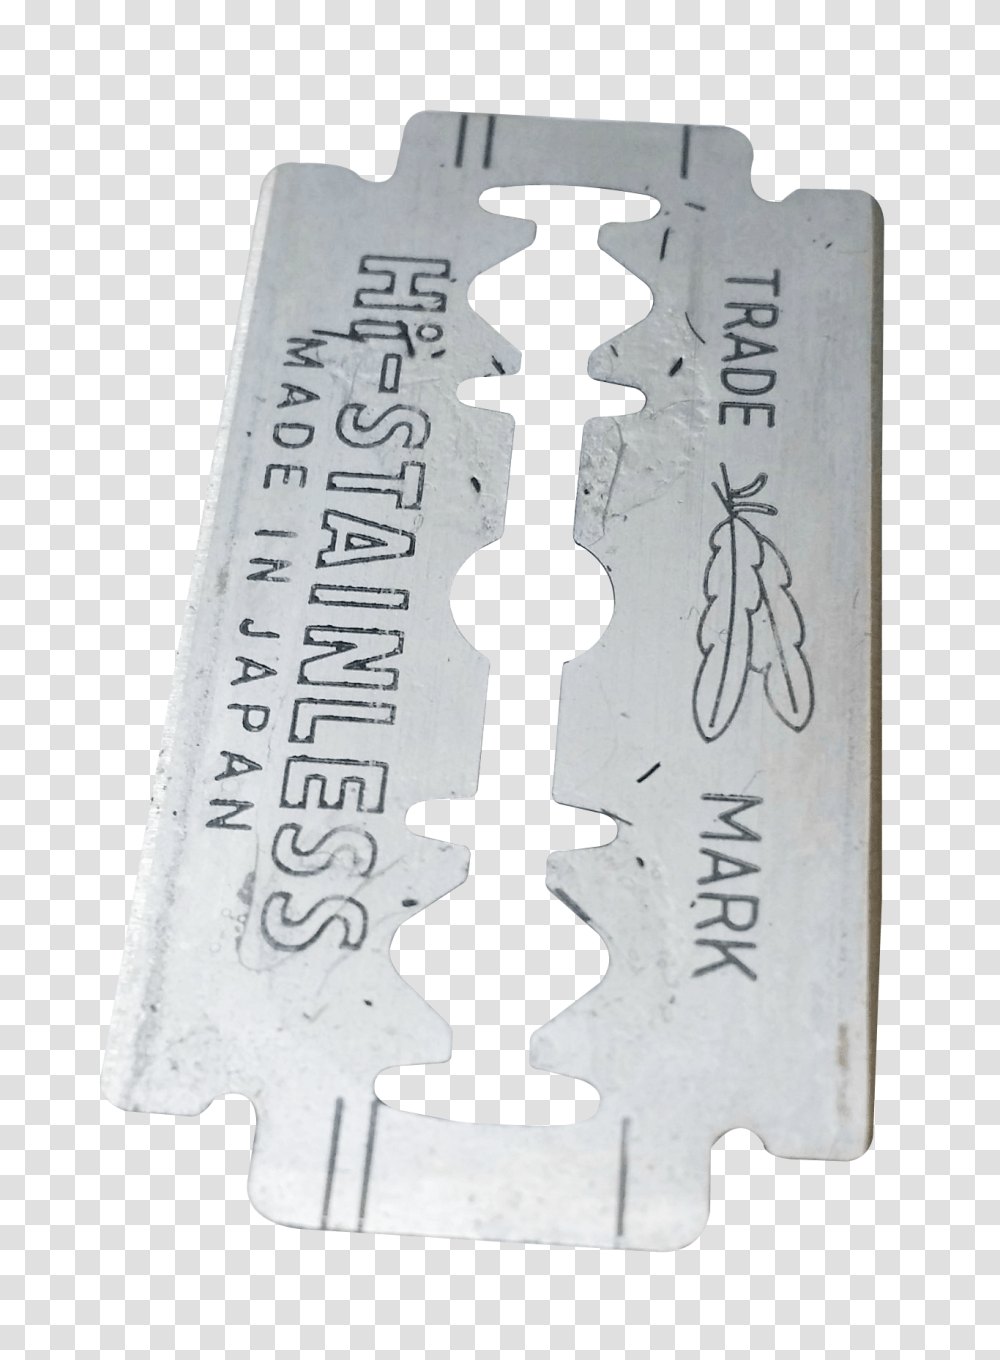 Razor Blade Image, Tableware, Weapon, Weaponry Transparent Png